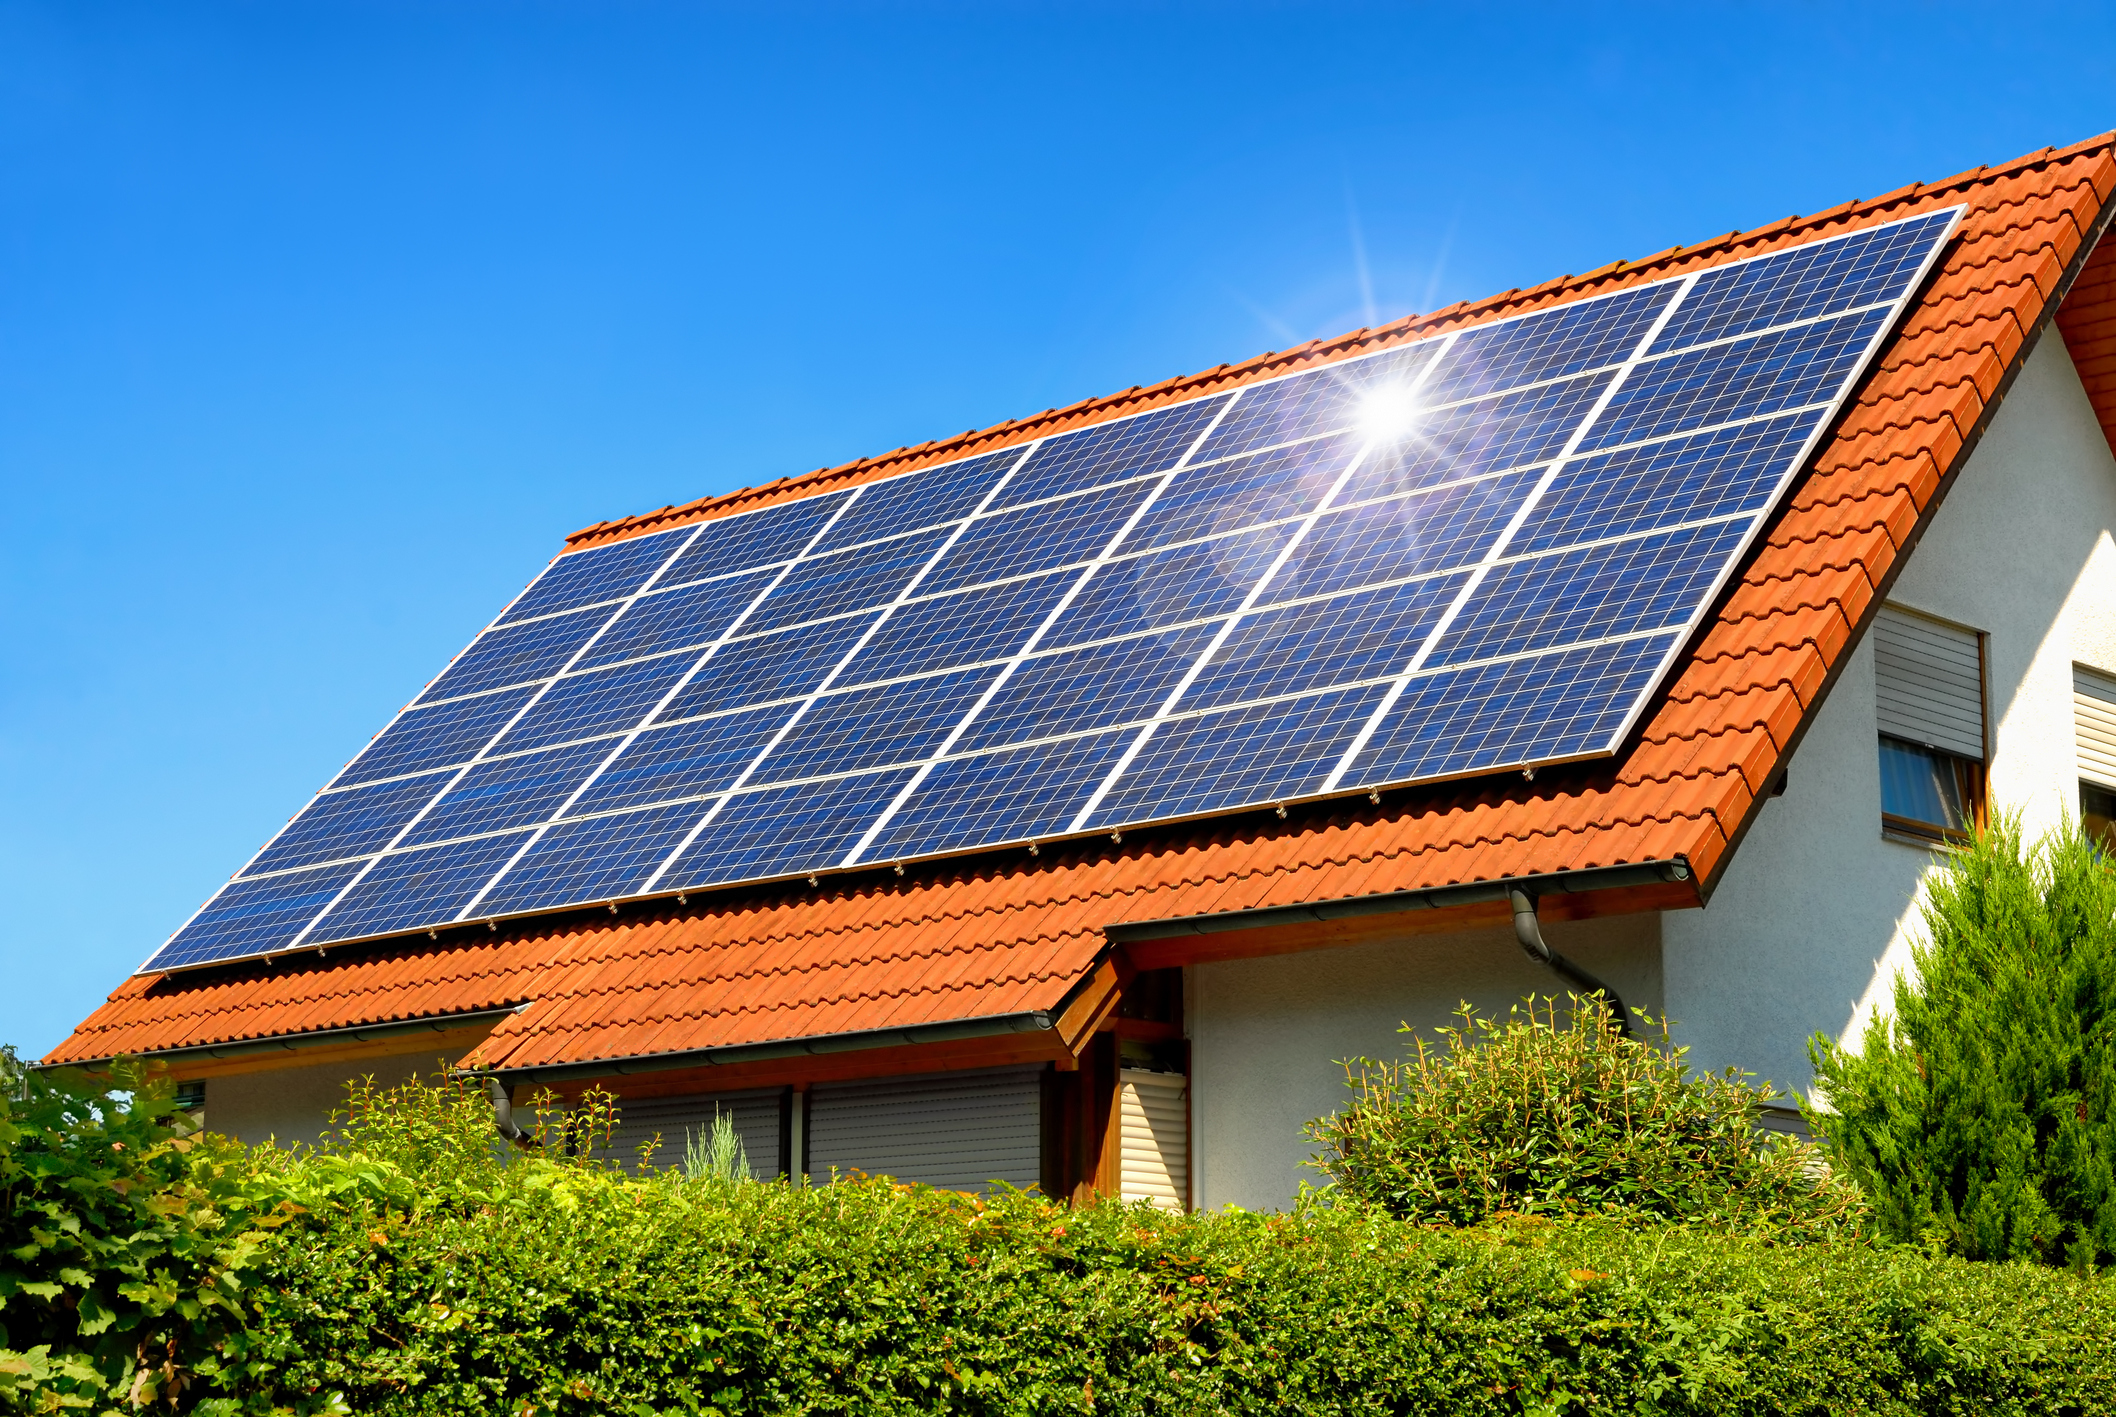 12v vs. 24v solar panels: The difference between them and which one is right for you?